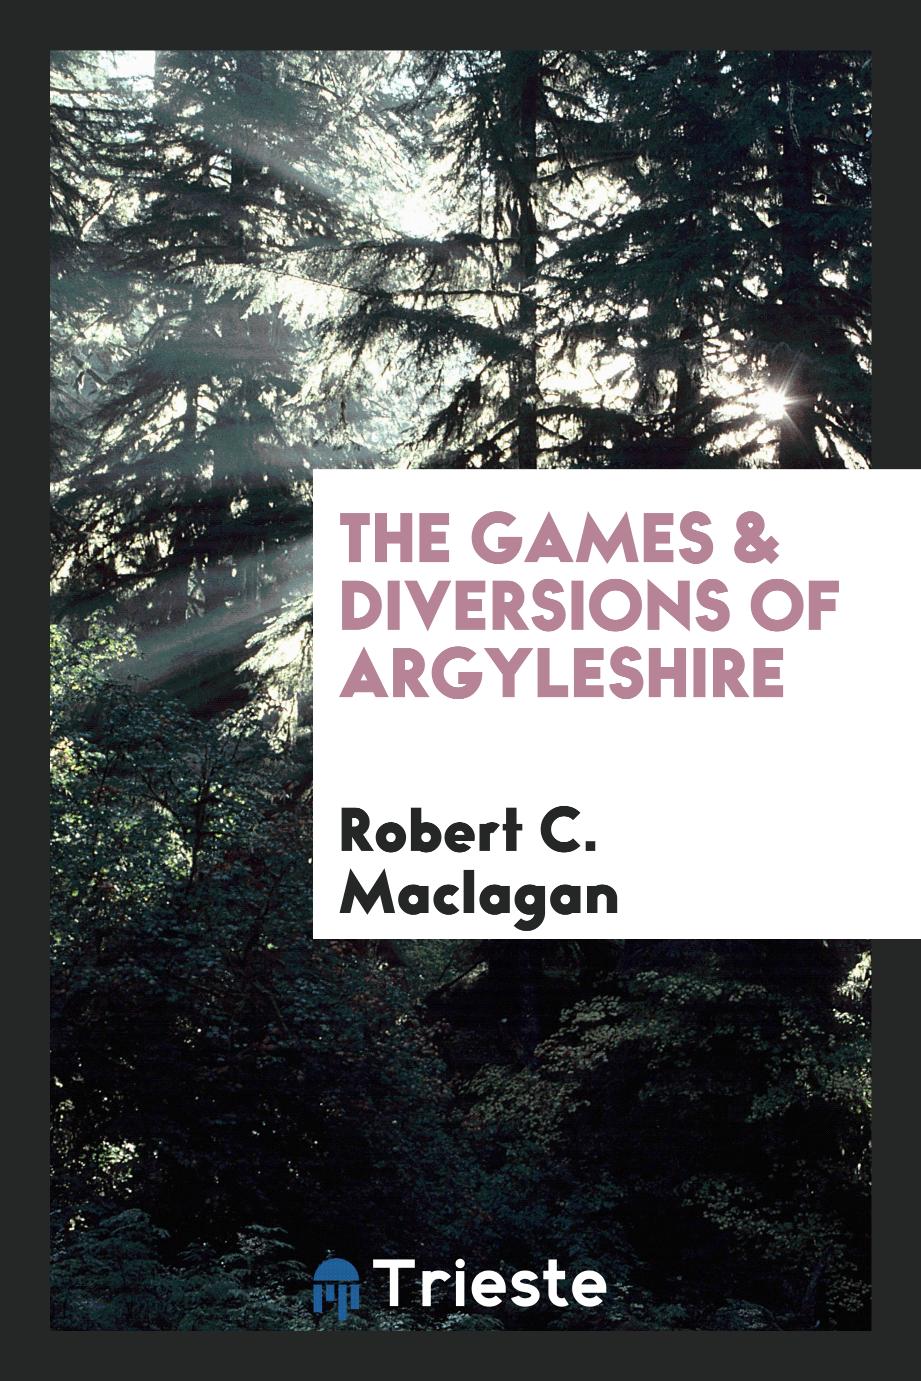 The games & diversions of Argyleshire